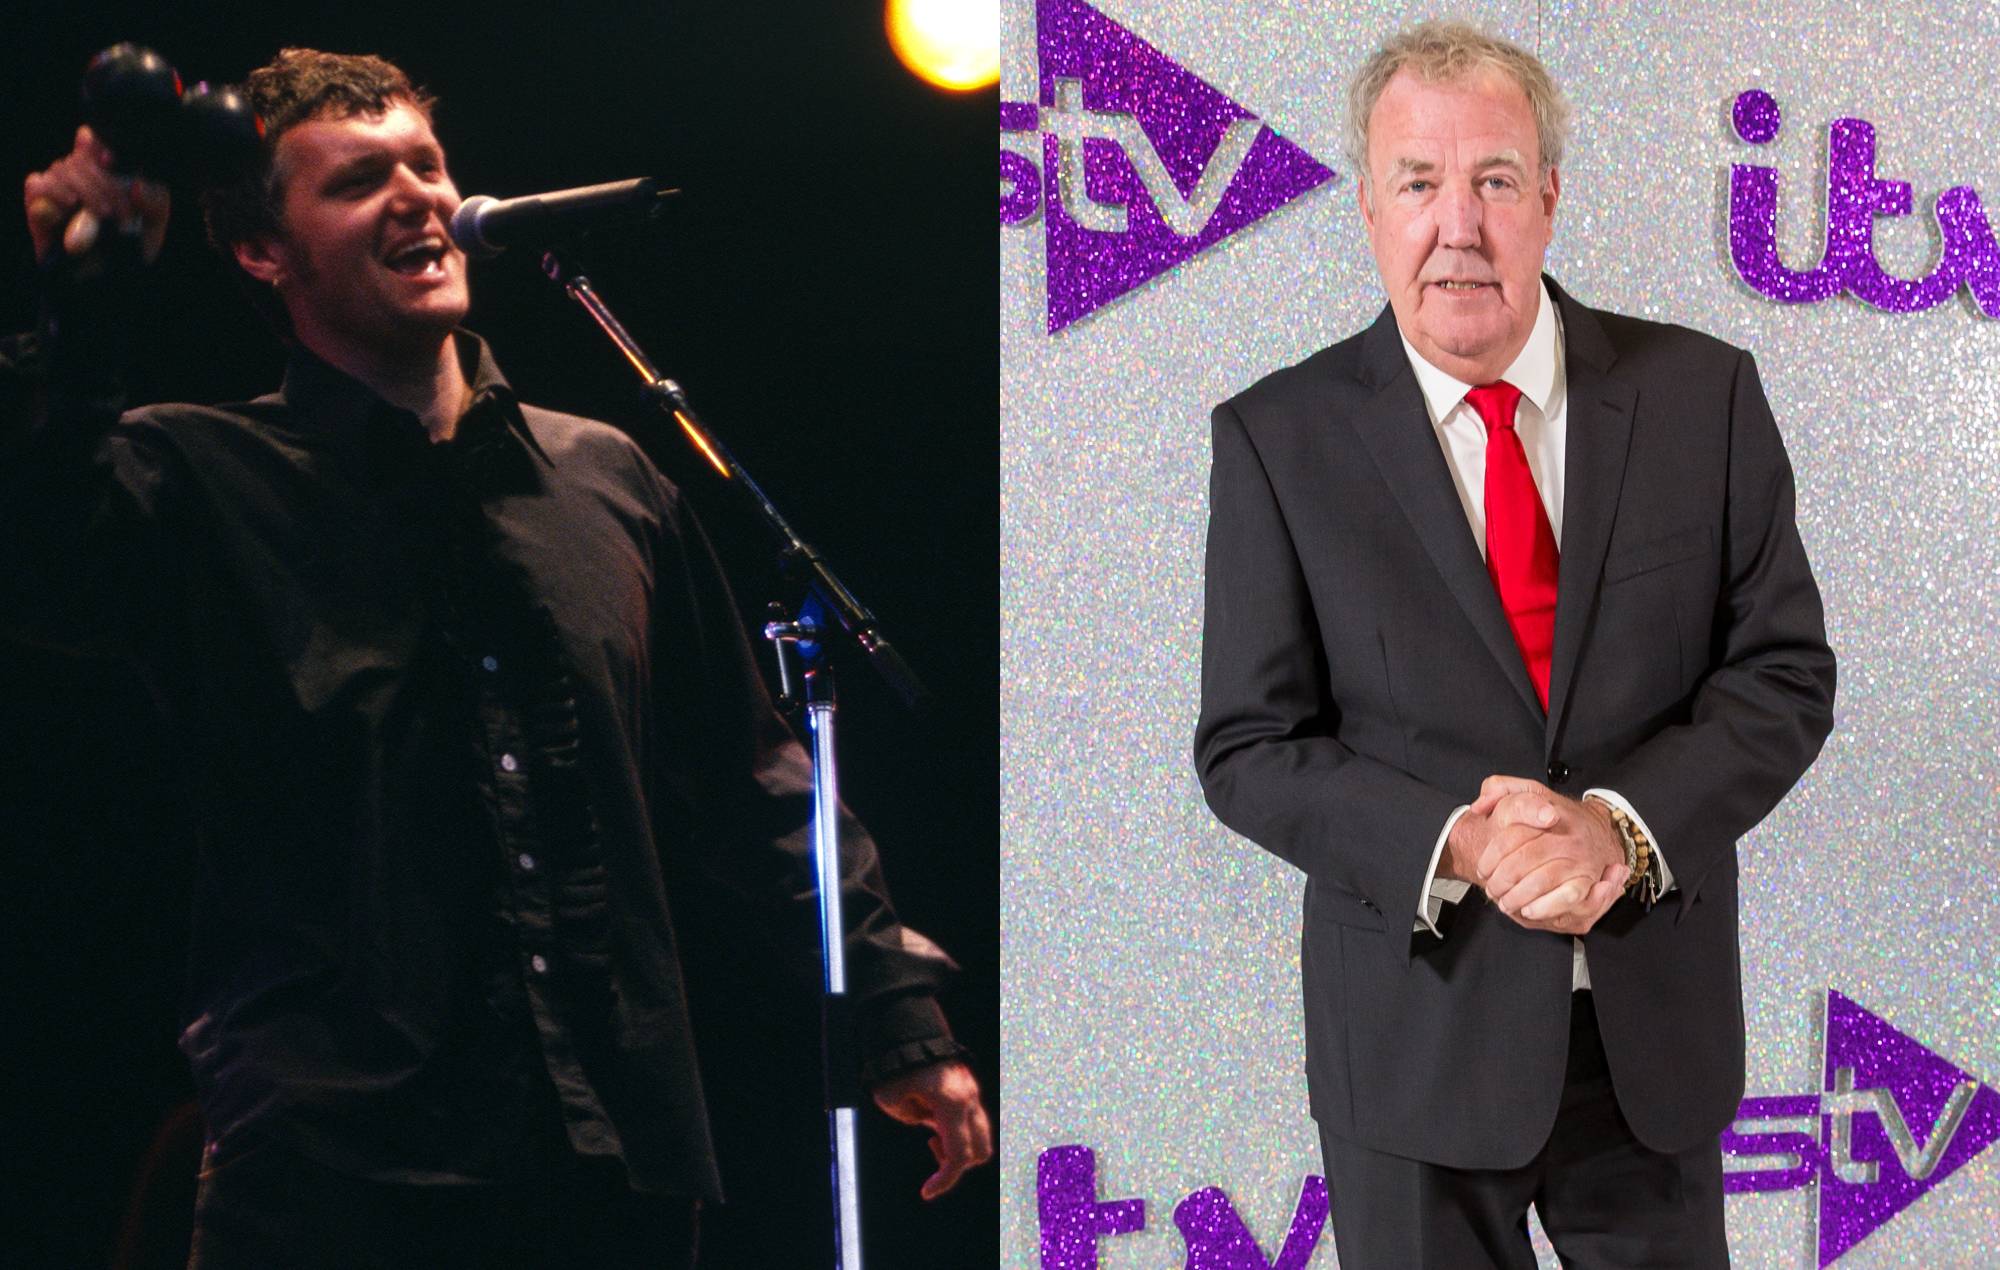 Boff Whalley of Chumbawamba and Jeremy Clarkson